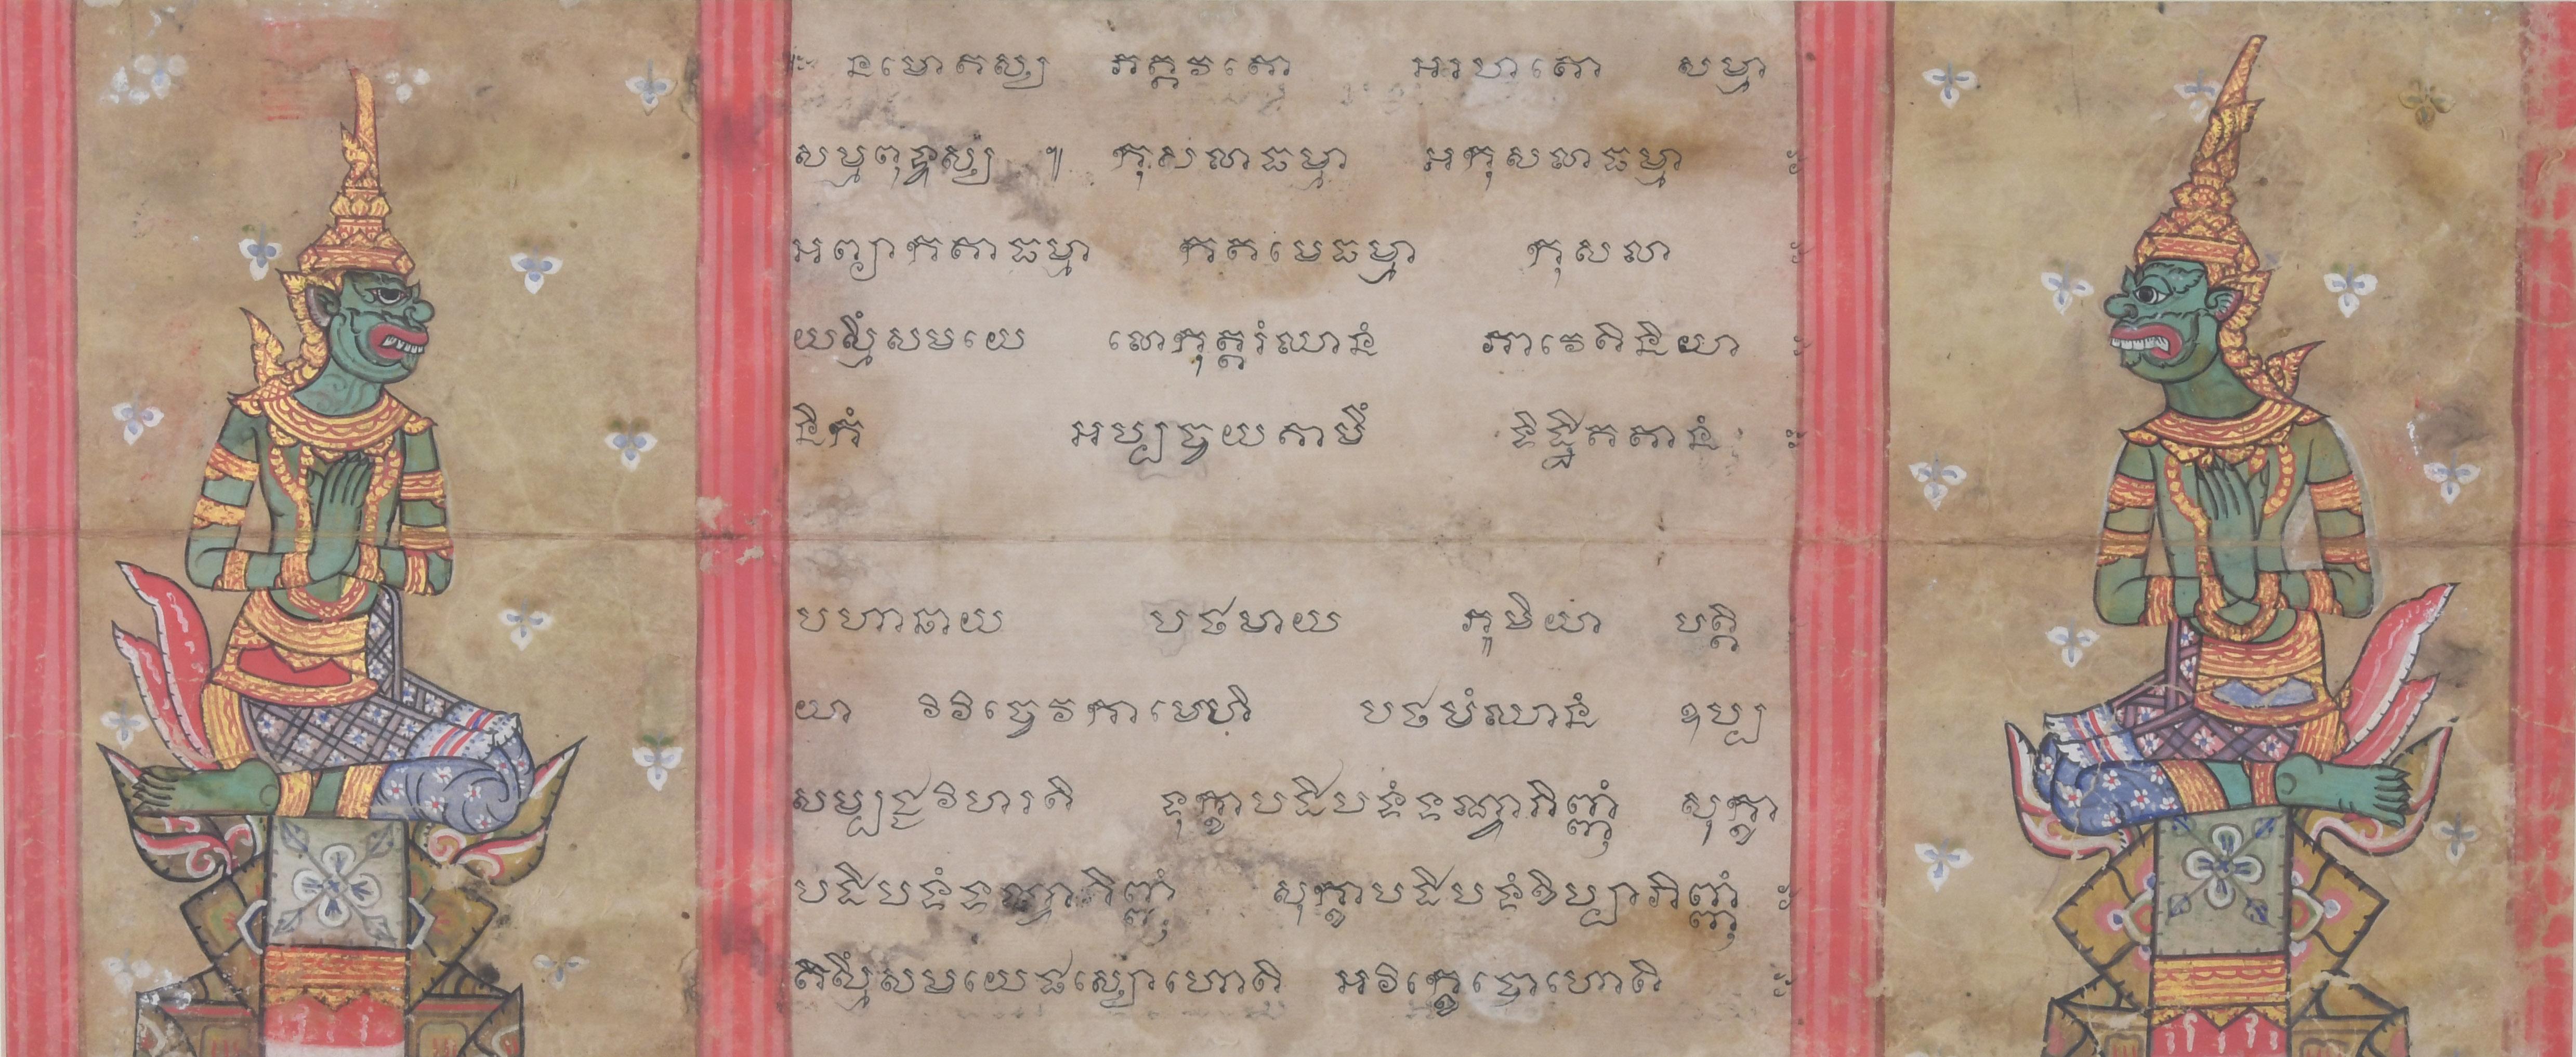 Unknown Figurative Art - Two Miniatures and text from the "Legend of Phra Malai"